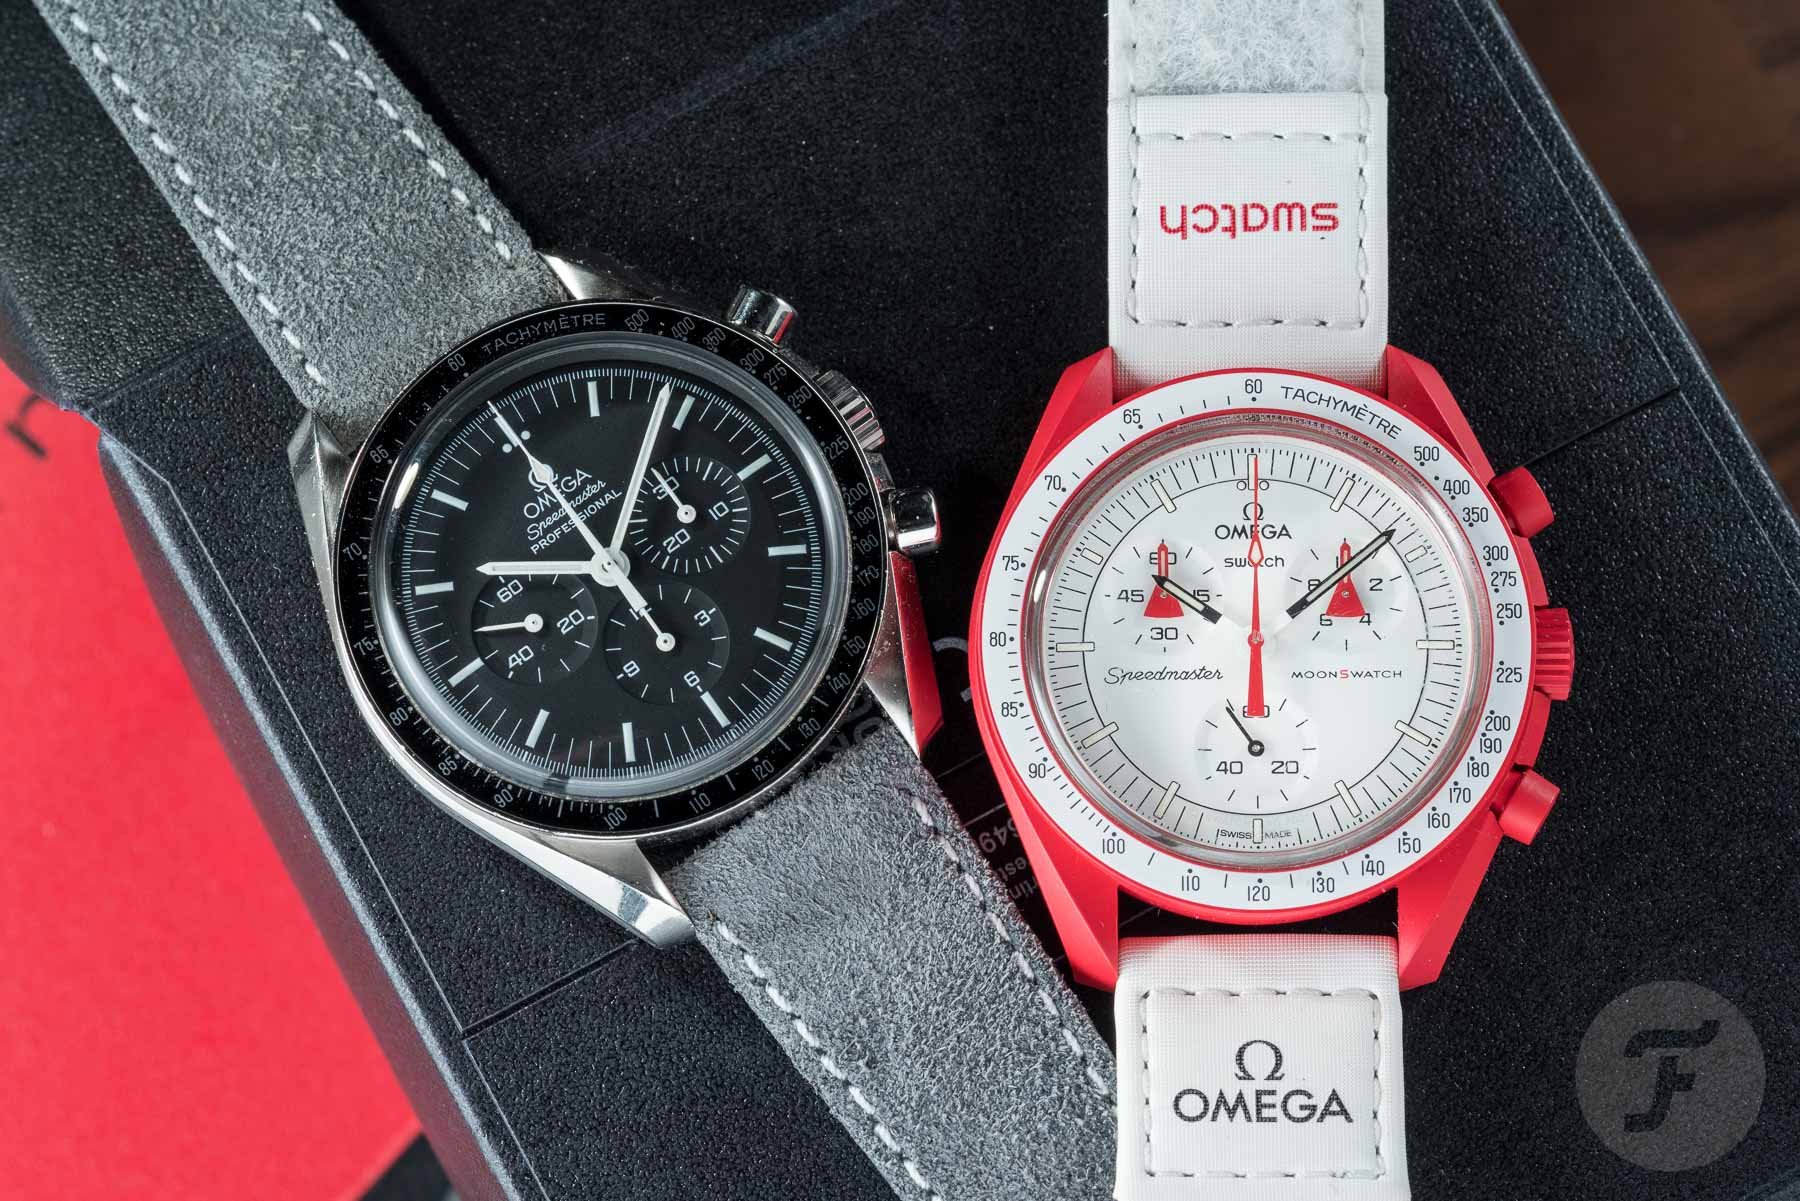 F Omega × Swatch Speedmaster MoonSwatch — Hands On Review